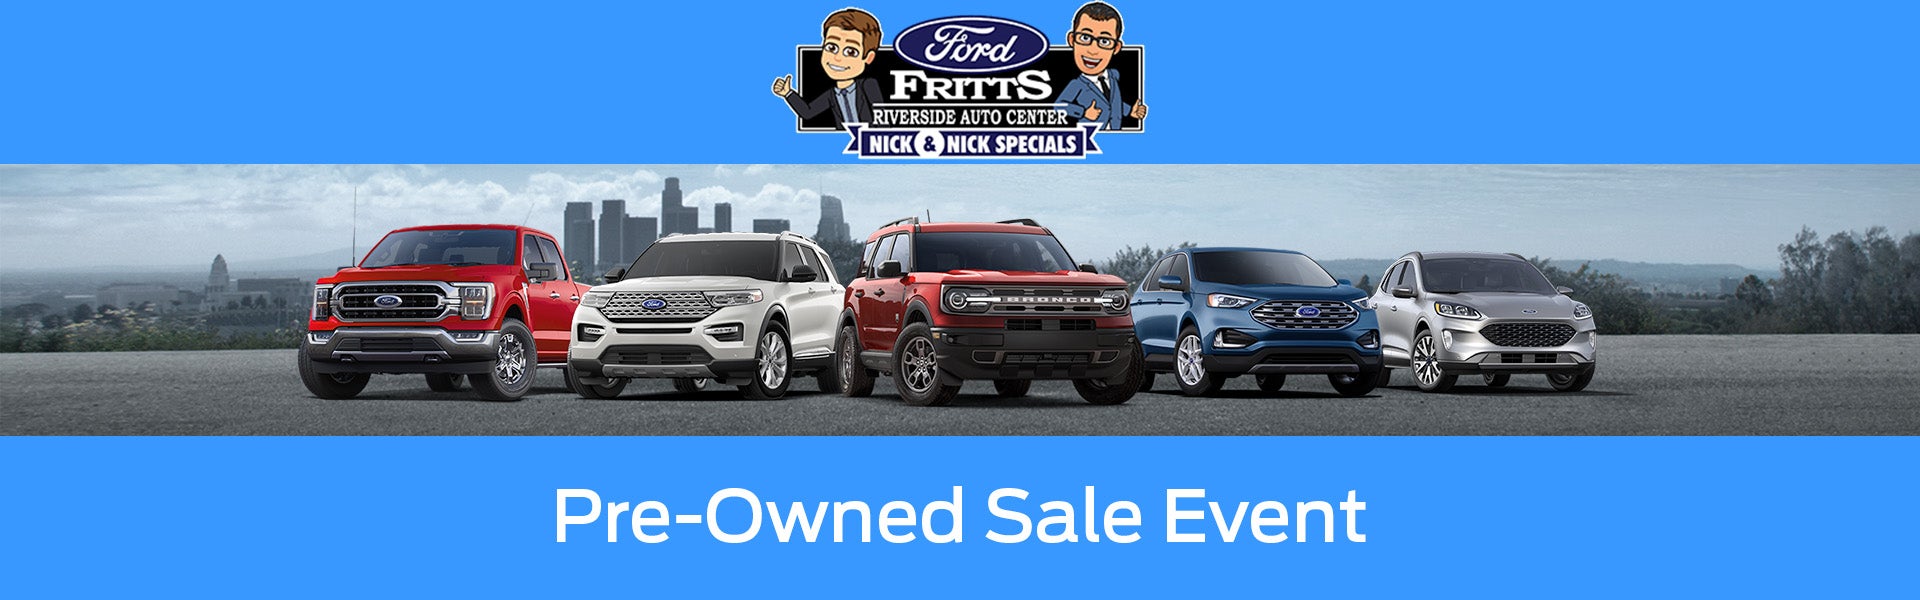 Pre-Owned Sale Event